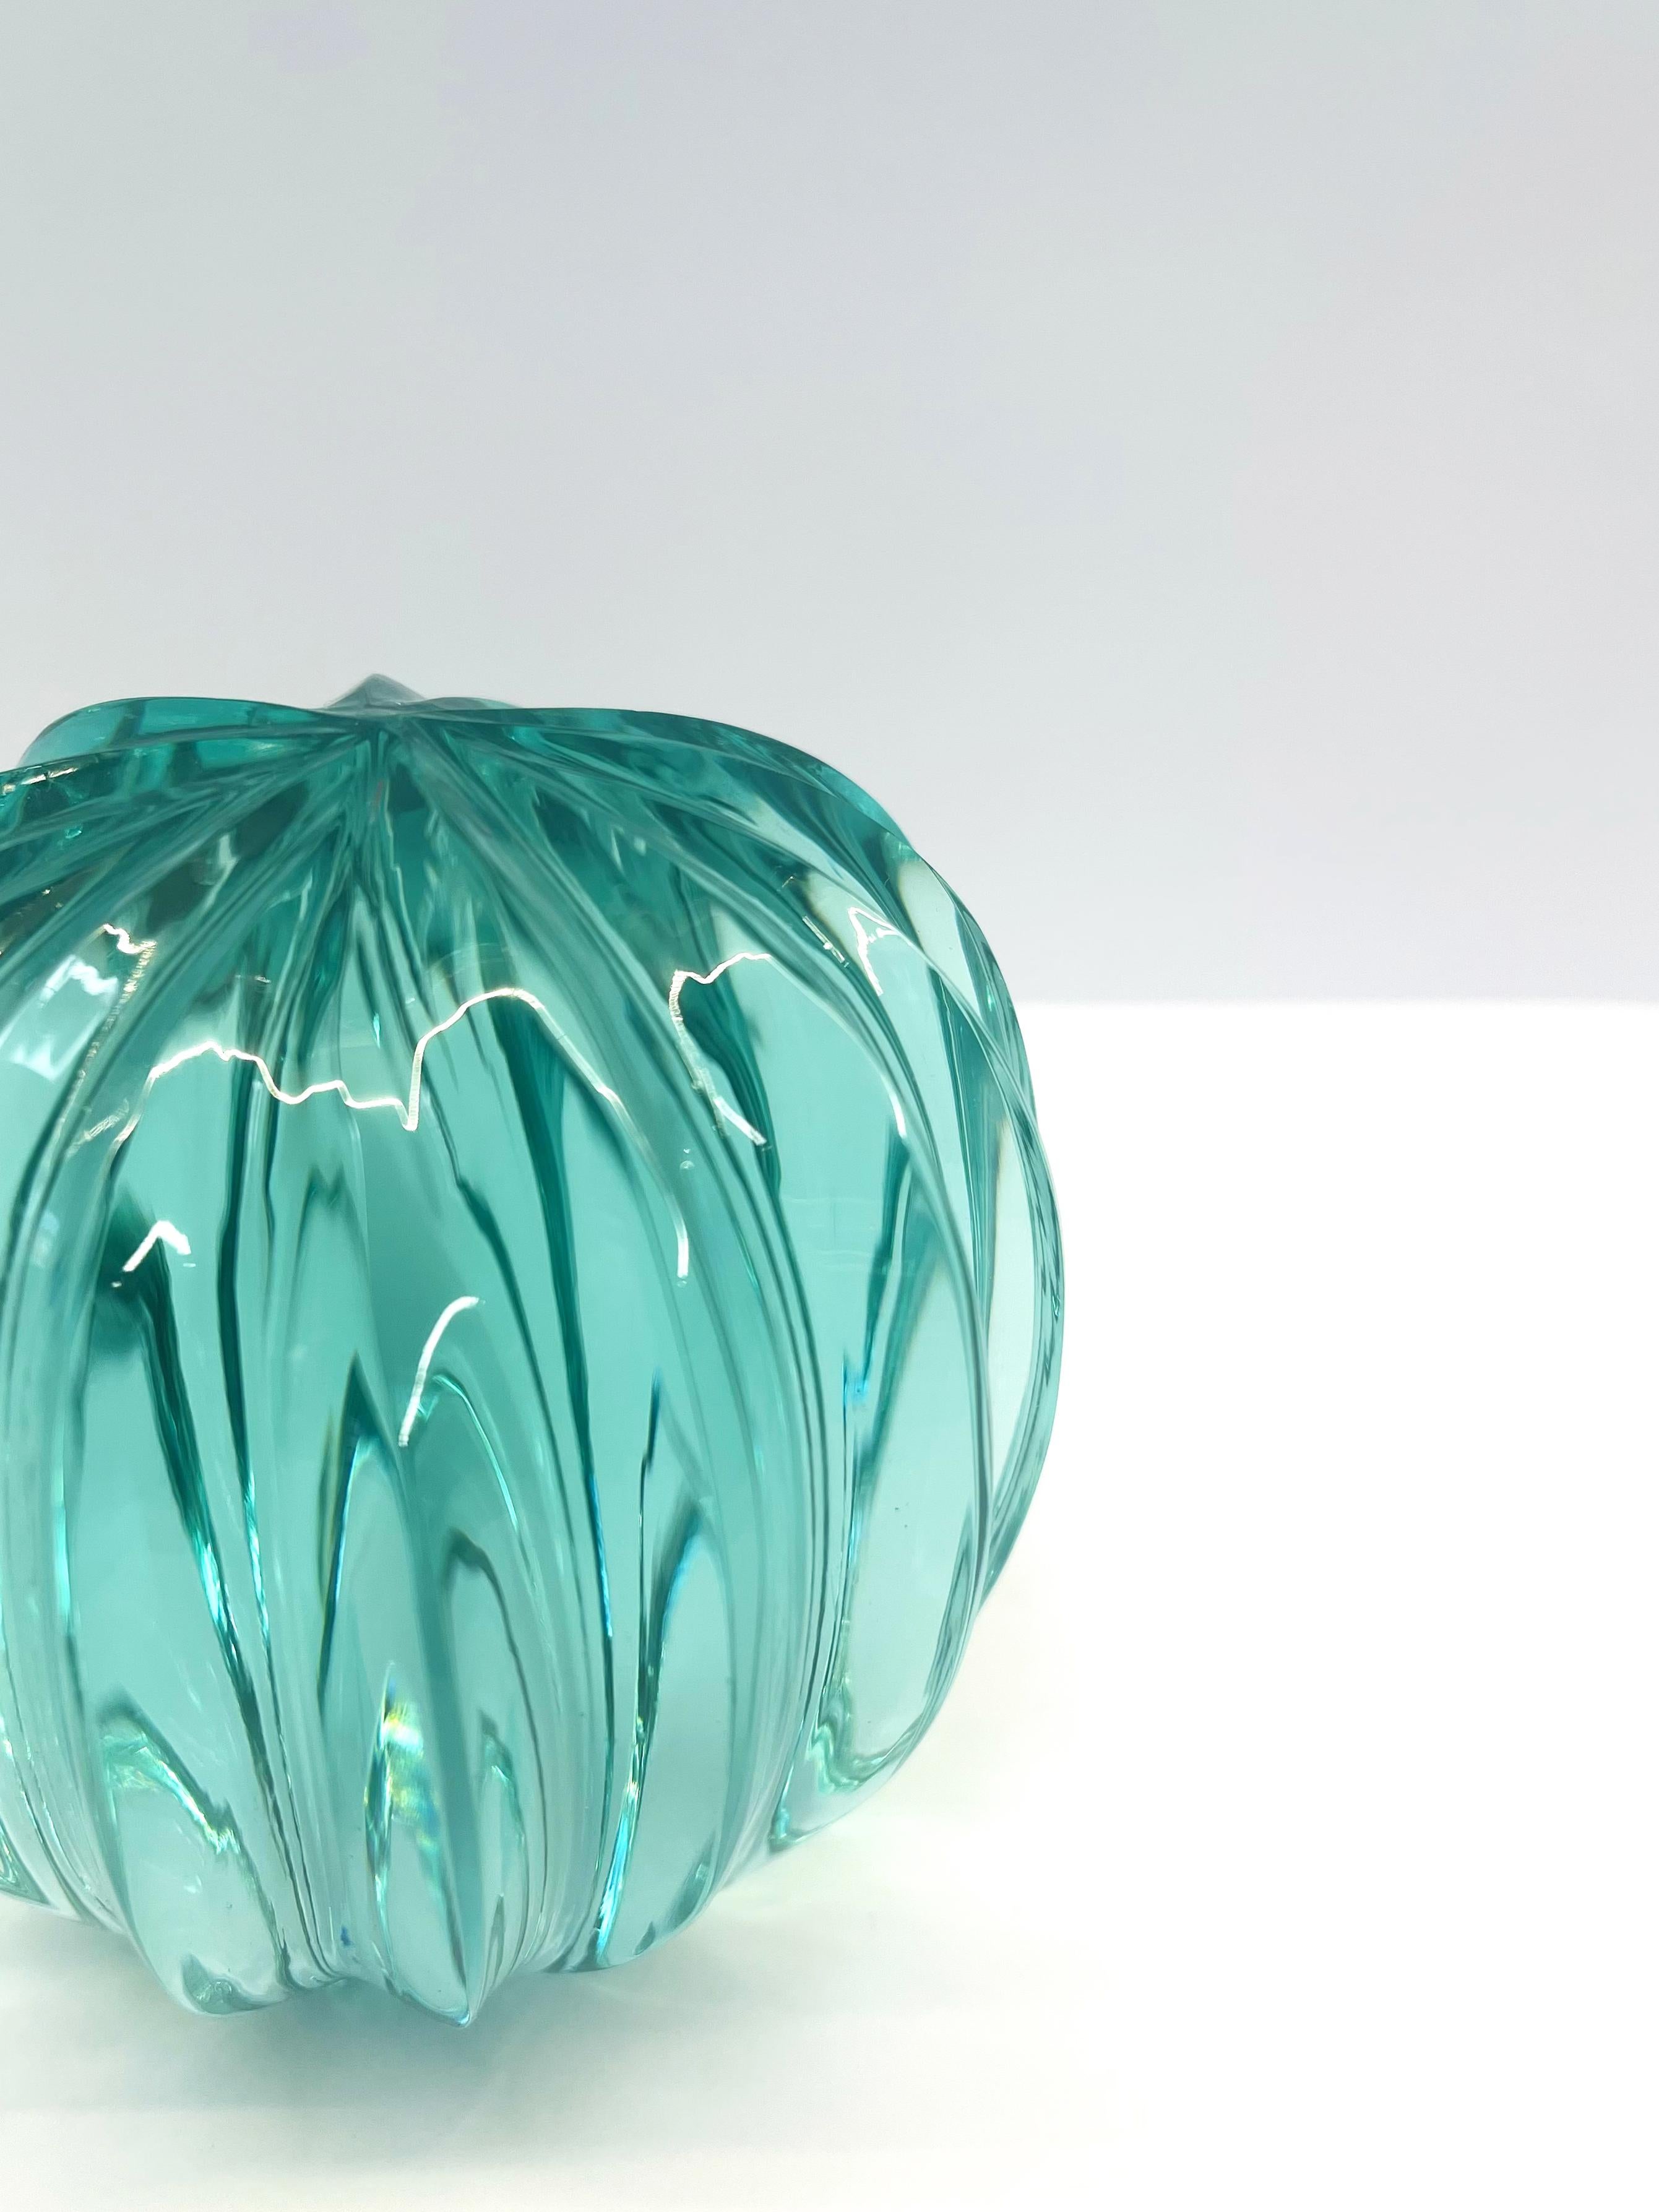 Modern Contemporary Hand-engraved Aquamarine Sculpture by Ghirò Studio For Sale